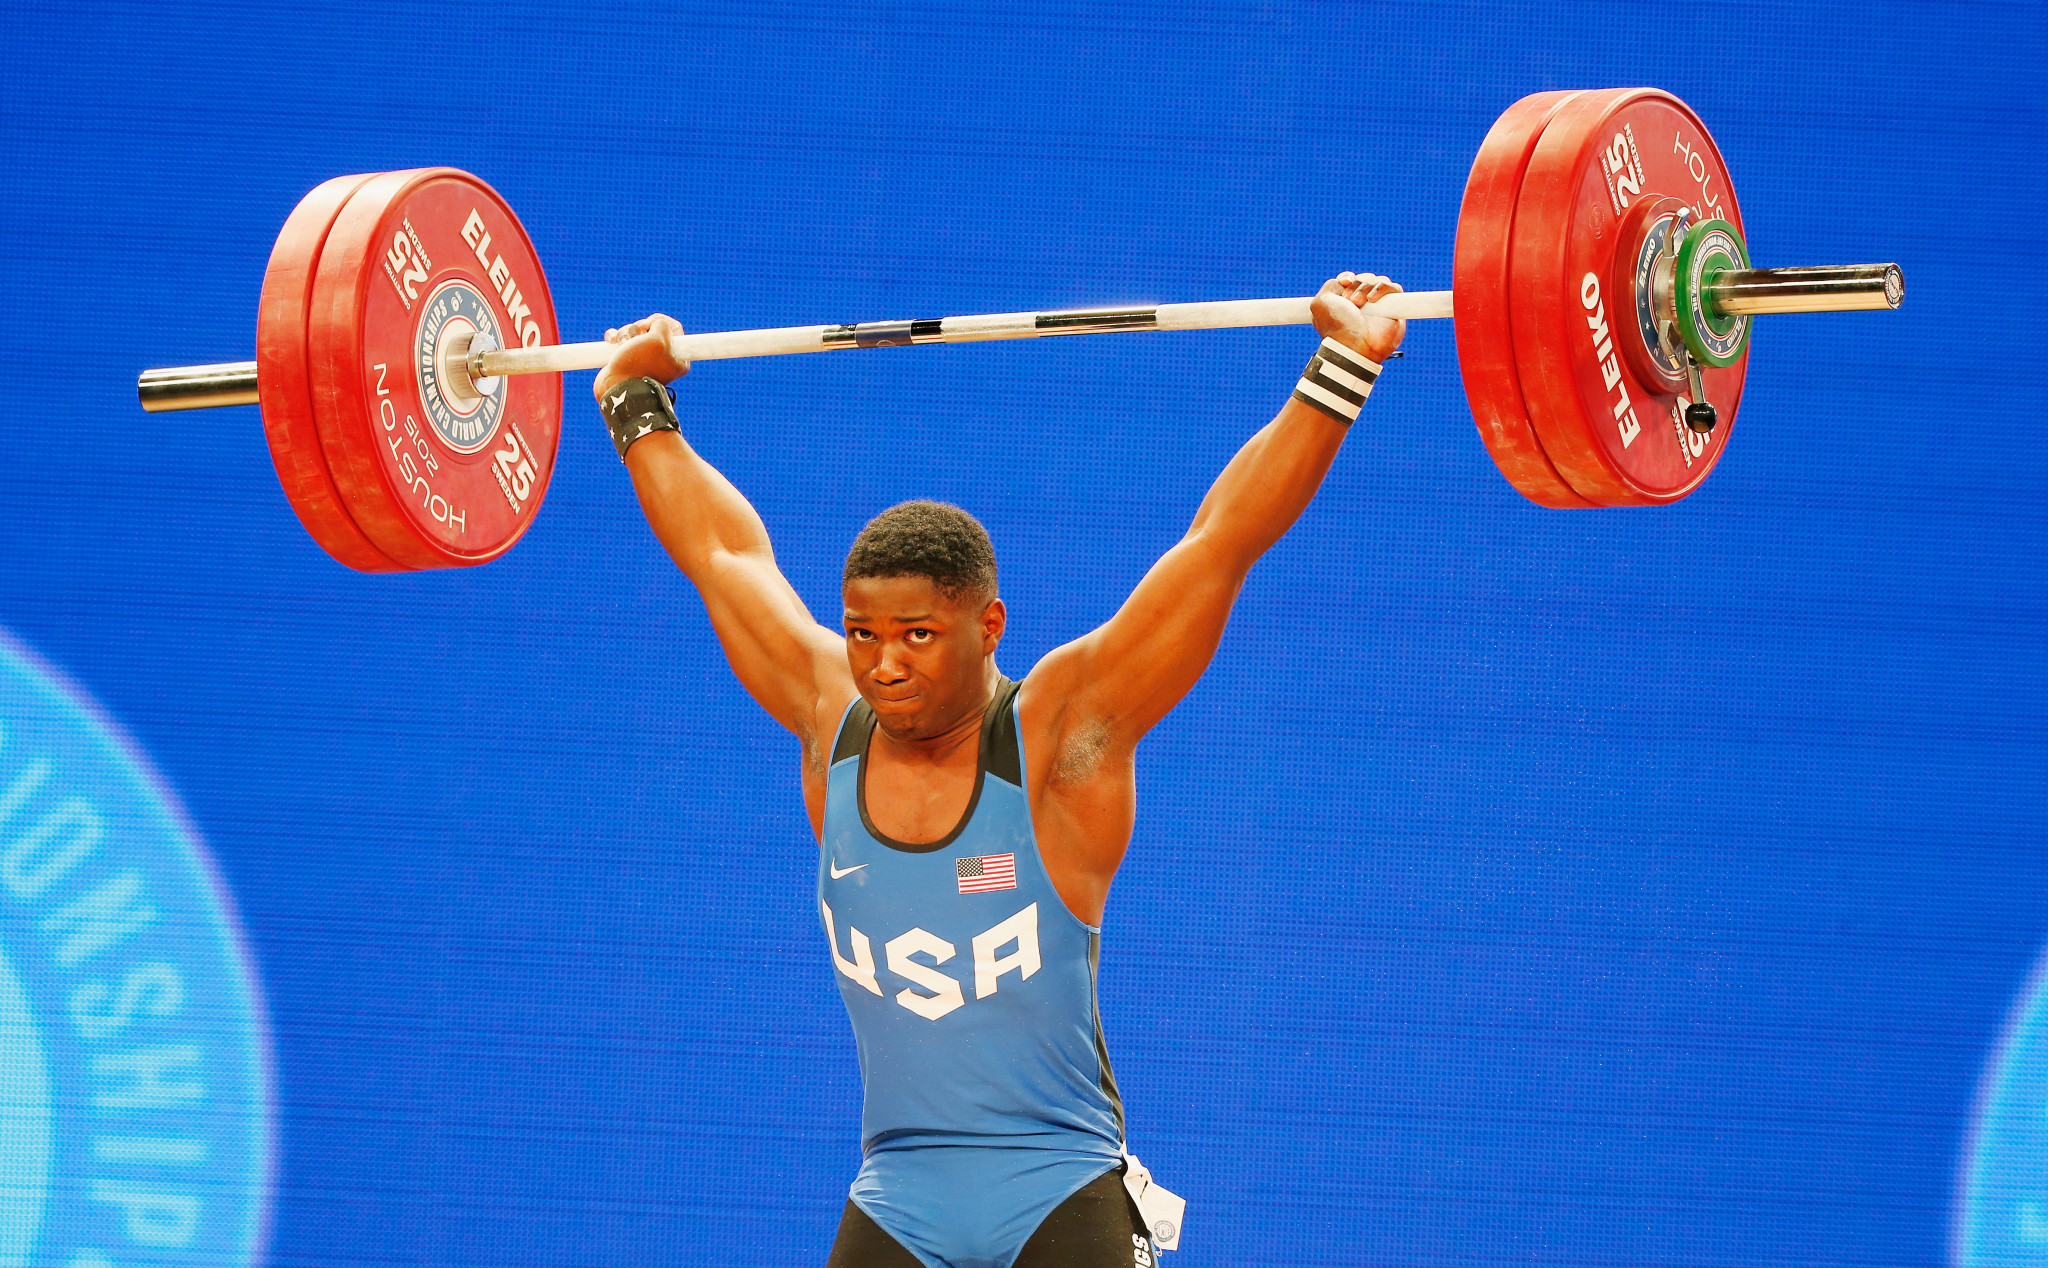 American and Canadian weightlifters will compete at the North American Open Series in 2021 ©Getty Images